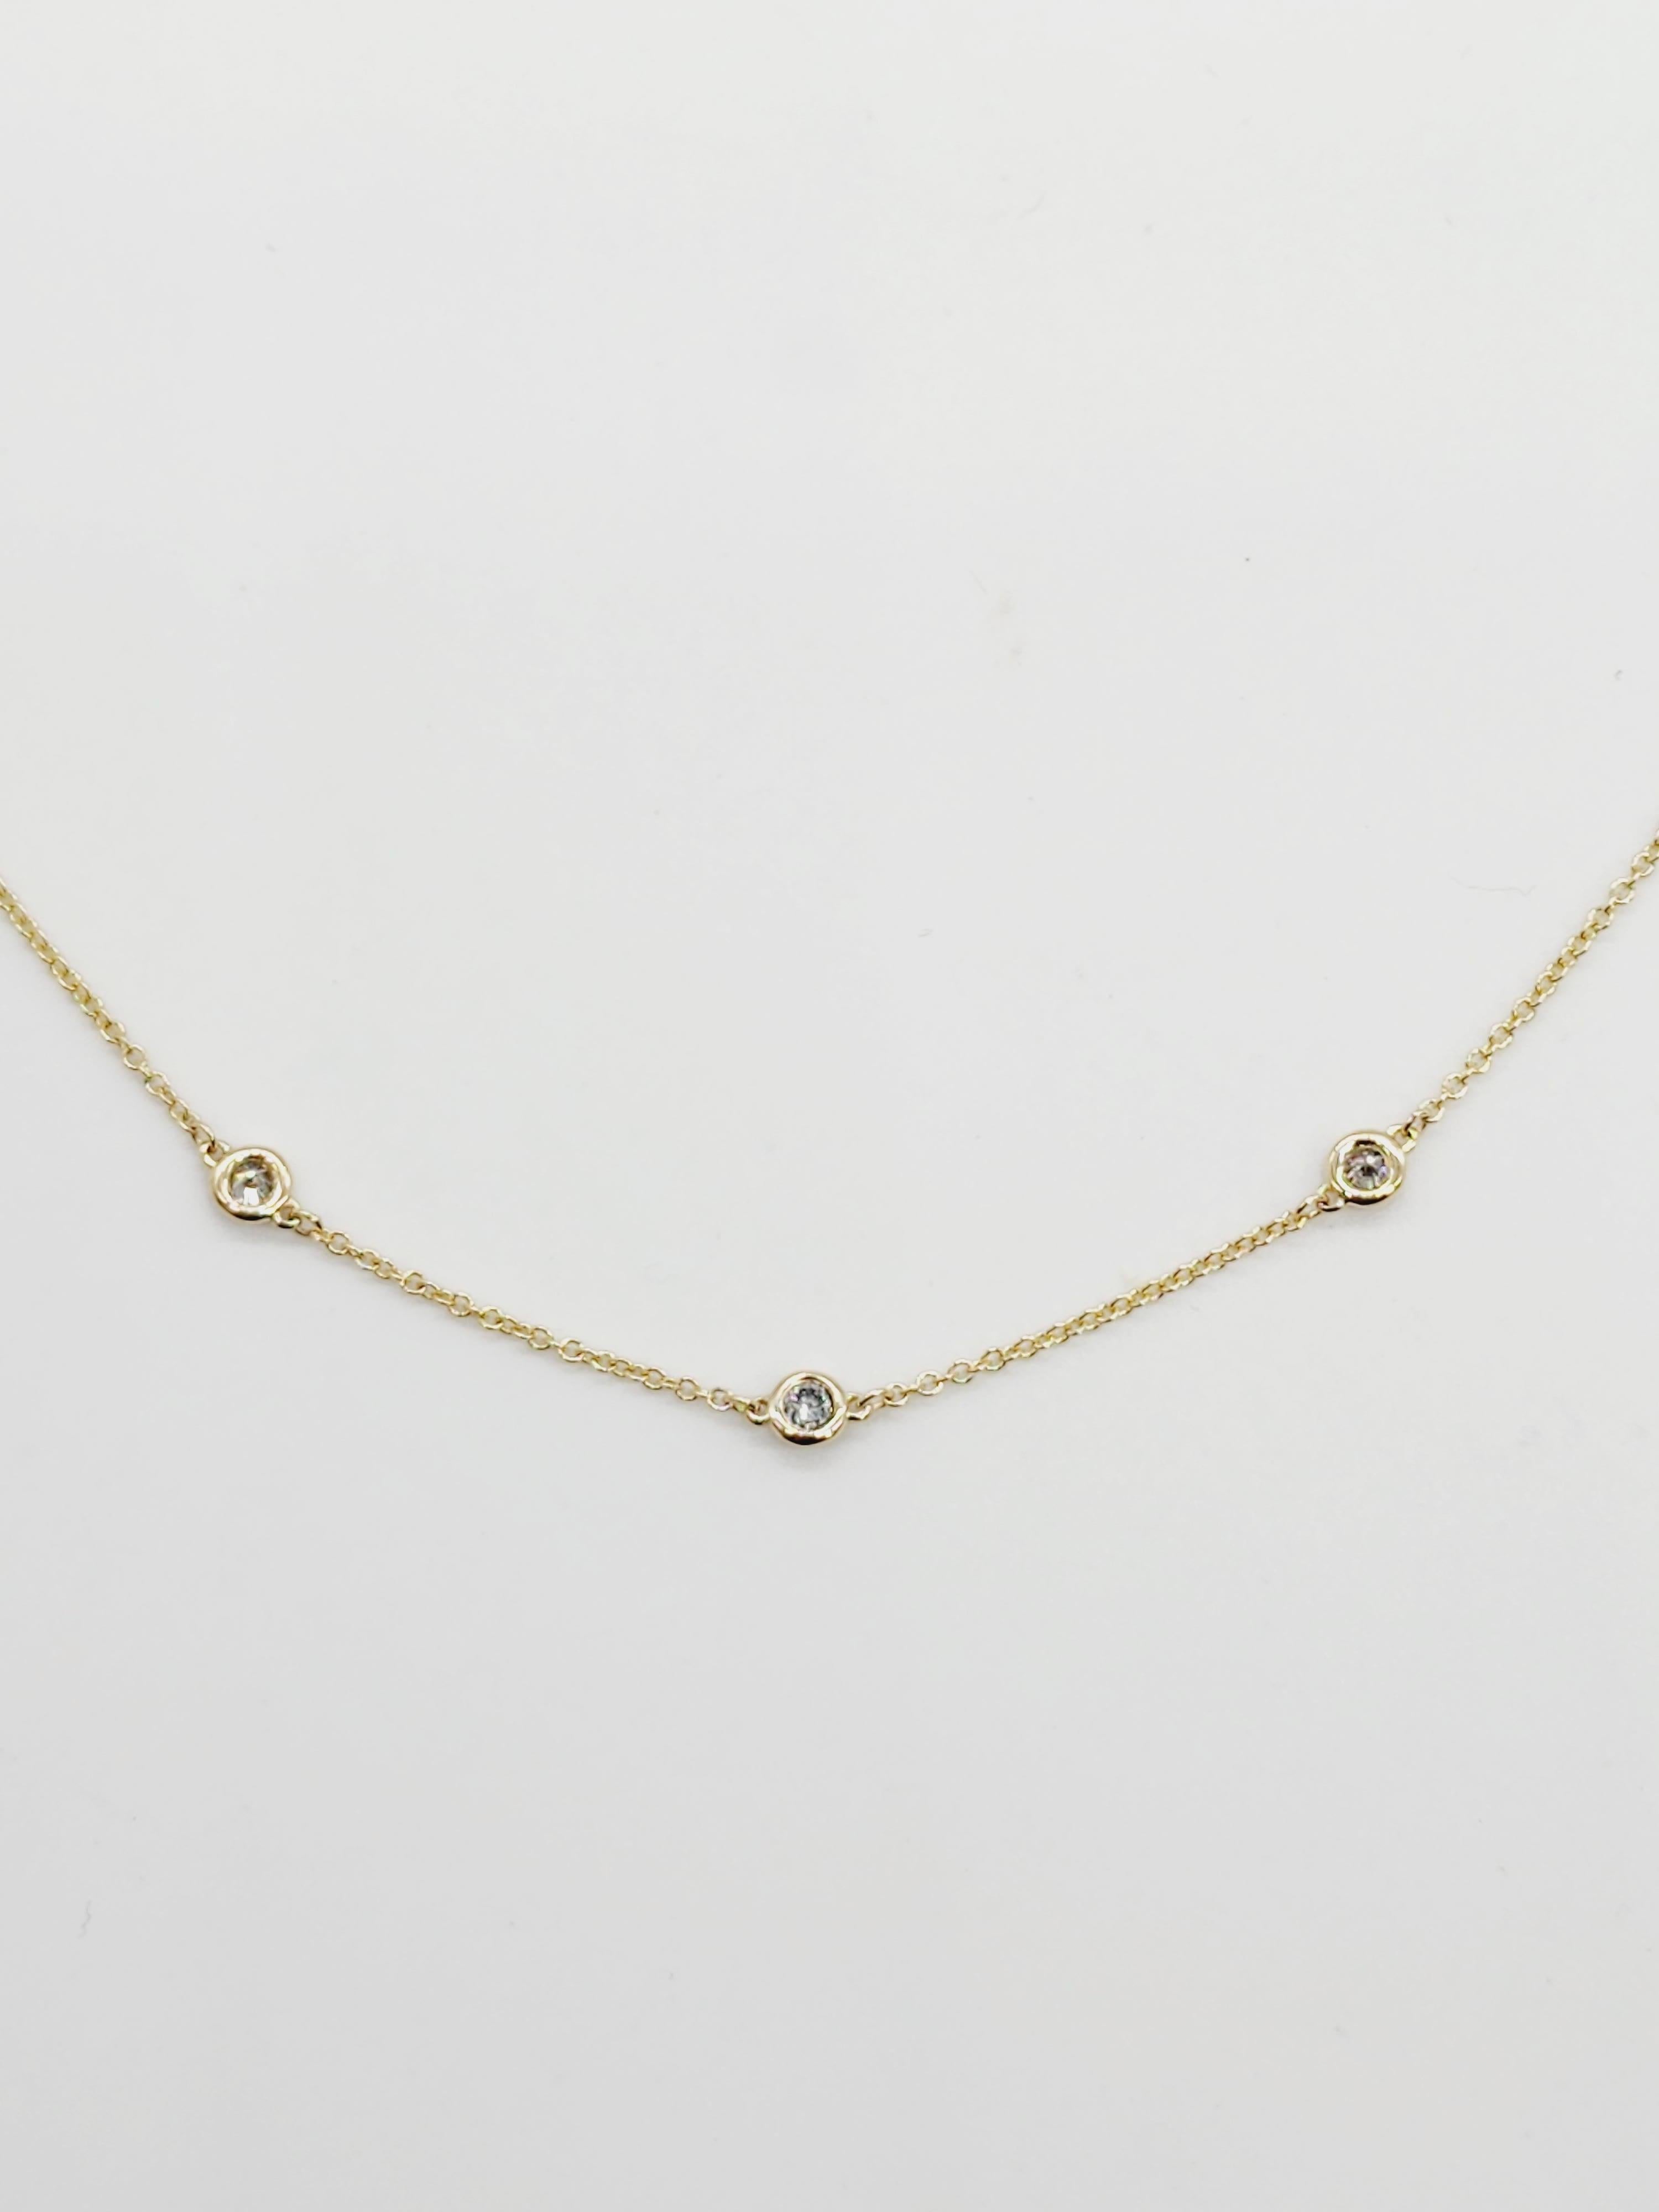 Women's 1.50 Carats 19 Stations Diamond by the Yard Necklace 14 Karat Yellow Gold For Sale